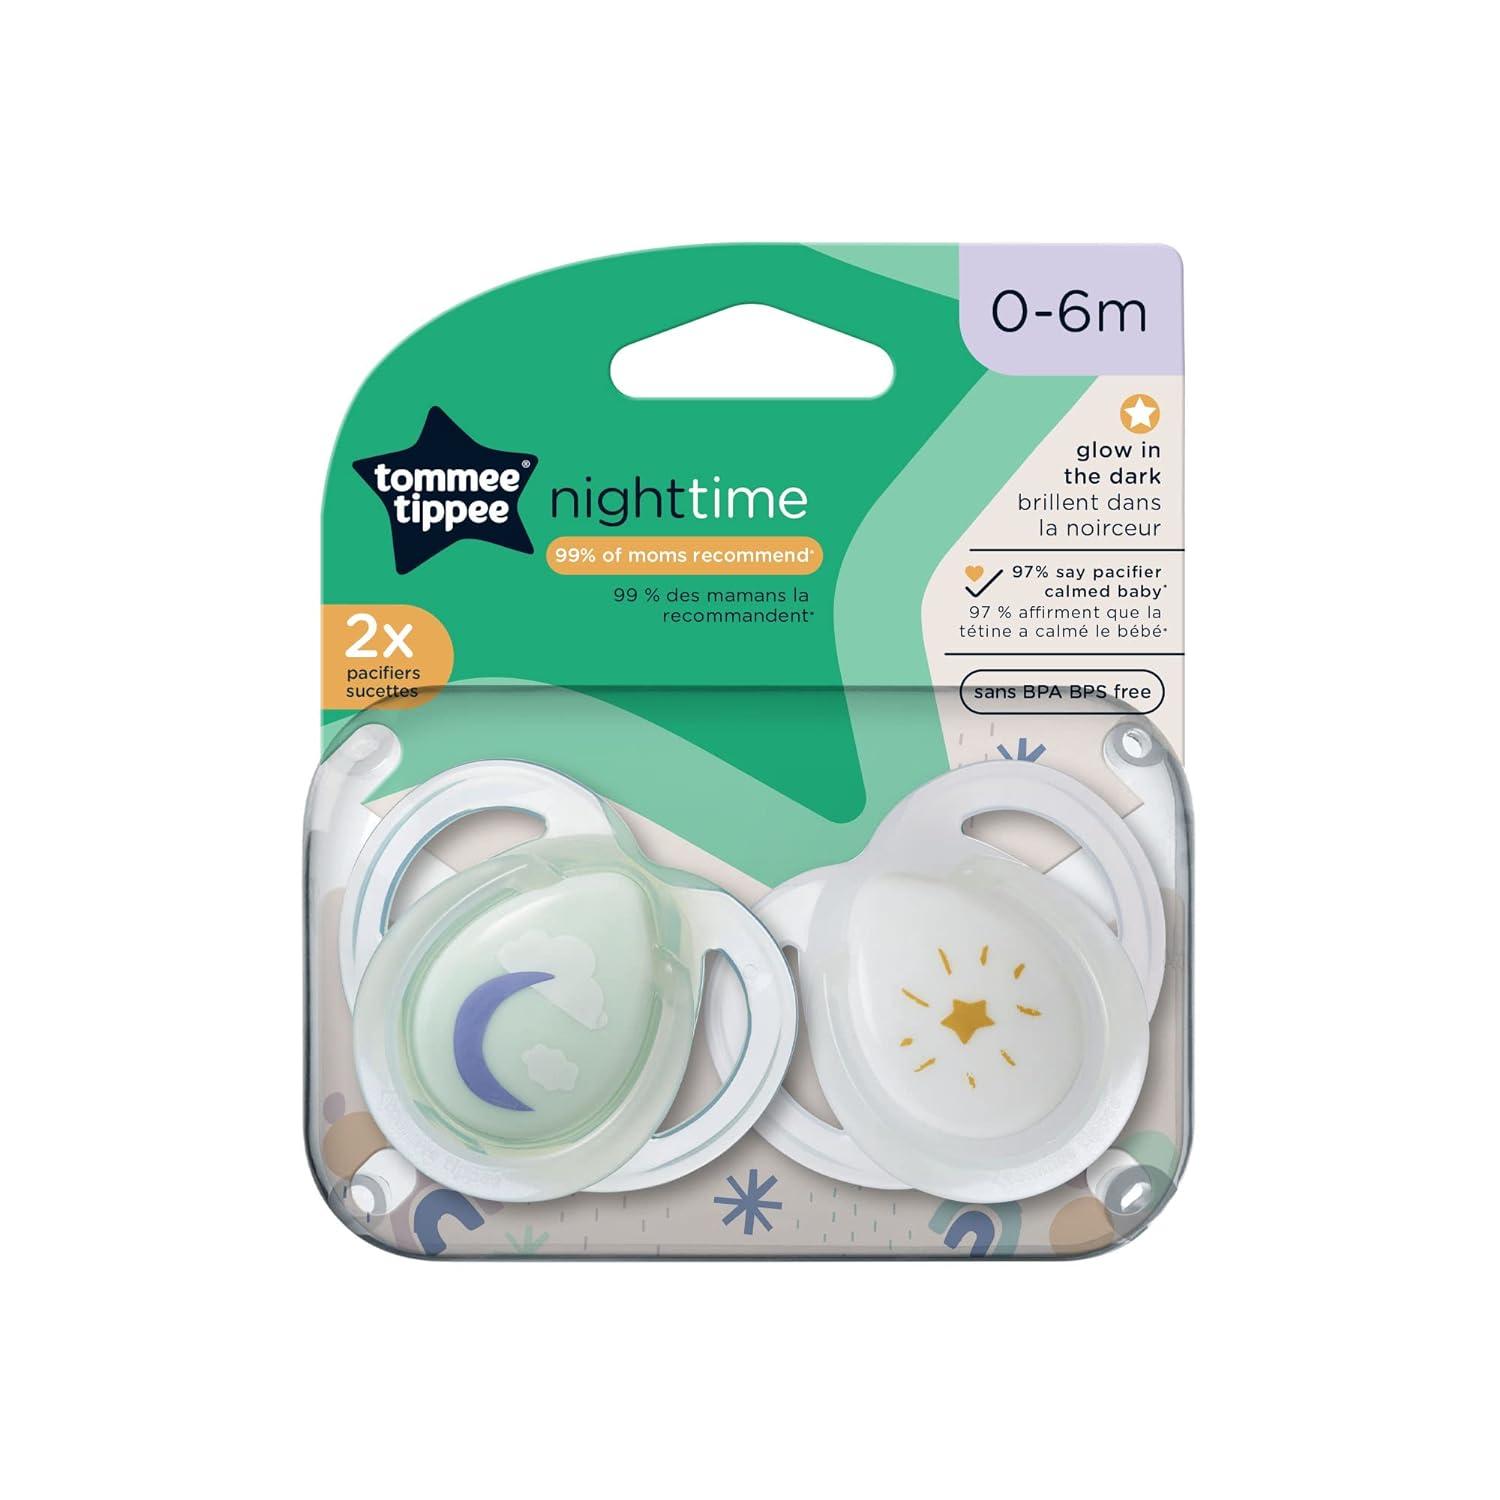 Tommee Tippee Breast-Like Pacifier Night, Glow in The Dark | 0-6m, 2 Pack | Includes Sterilizer Box